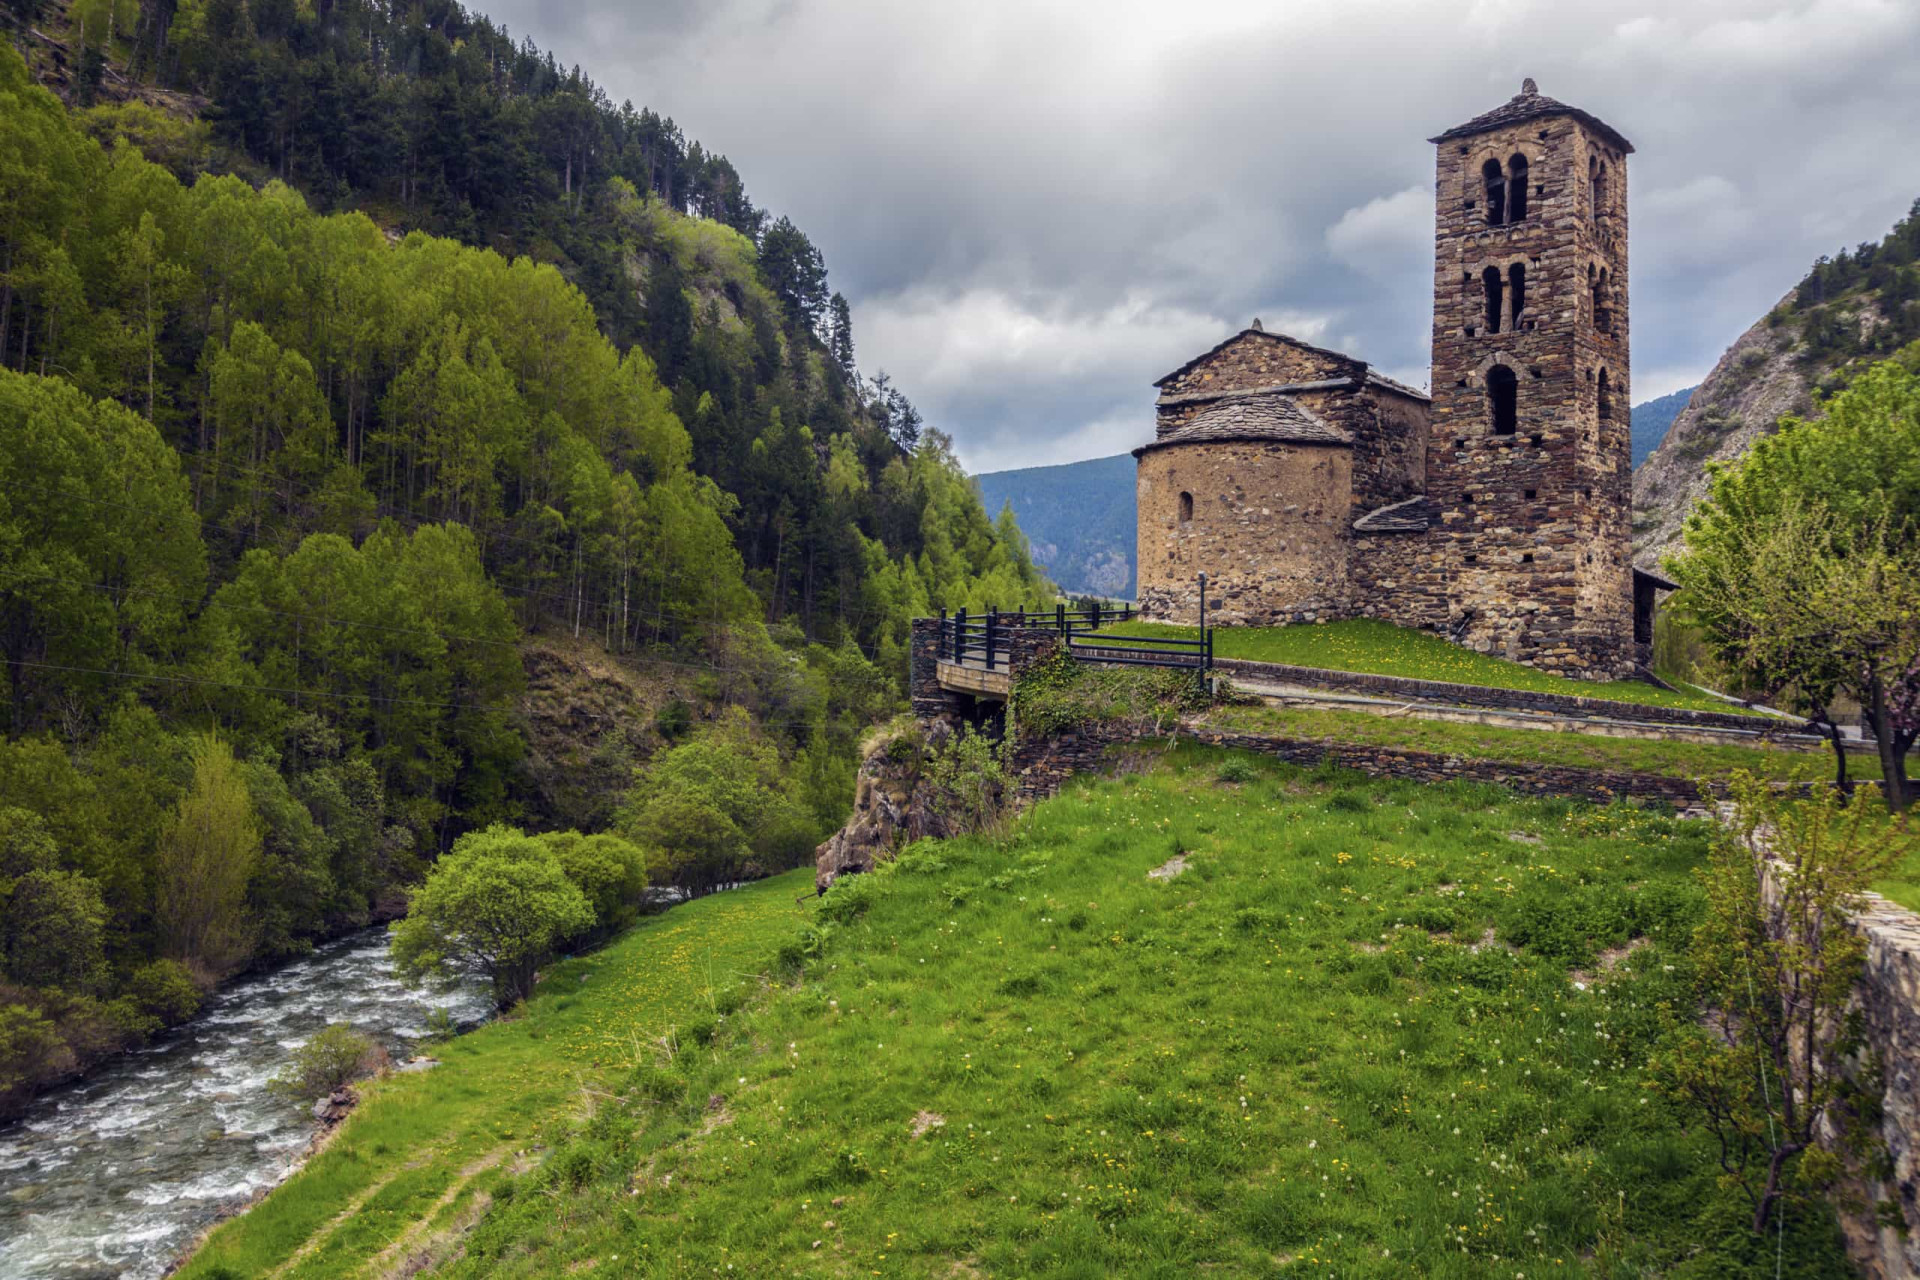 <p>When wandering through the northern town of Canillo, visitors should be sure to make time to visit the church of Sant Joan de Caselles, an old 12th-century church that holds some incredibly well-preserved frescoes and stucco images.</p><p><a href="https://www.msn.com/en-za/community/channel/vid-7xx8mnucu55yw63we9va2gwr7uihbxwc68fxqp25x6tg4ftibpra?cvid=94631541bc0f4f89bfd59158d696ad7e">Follow us and access great exclusive content every day</a></p>